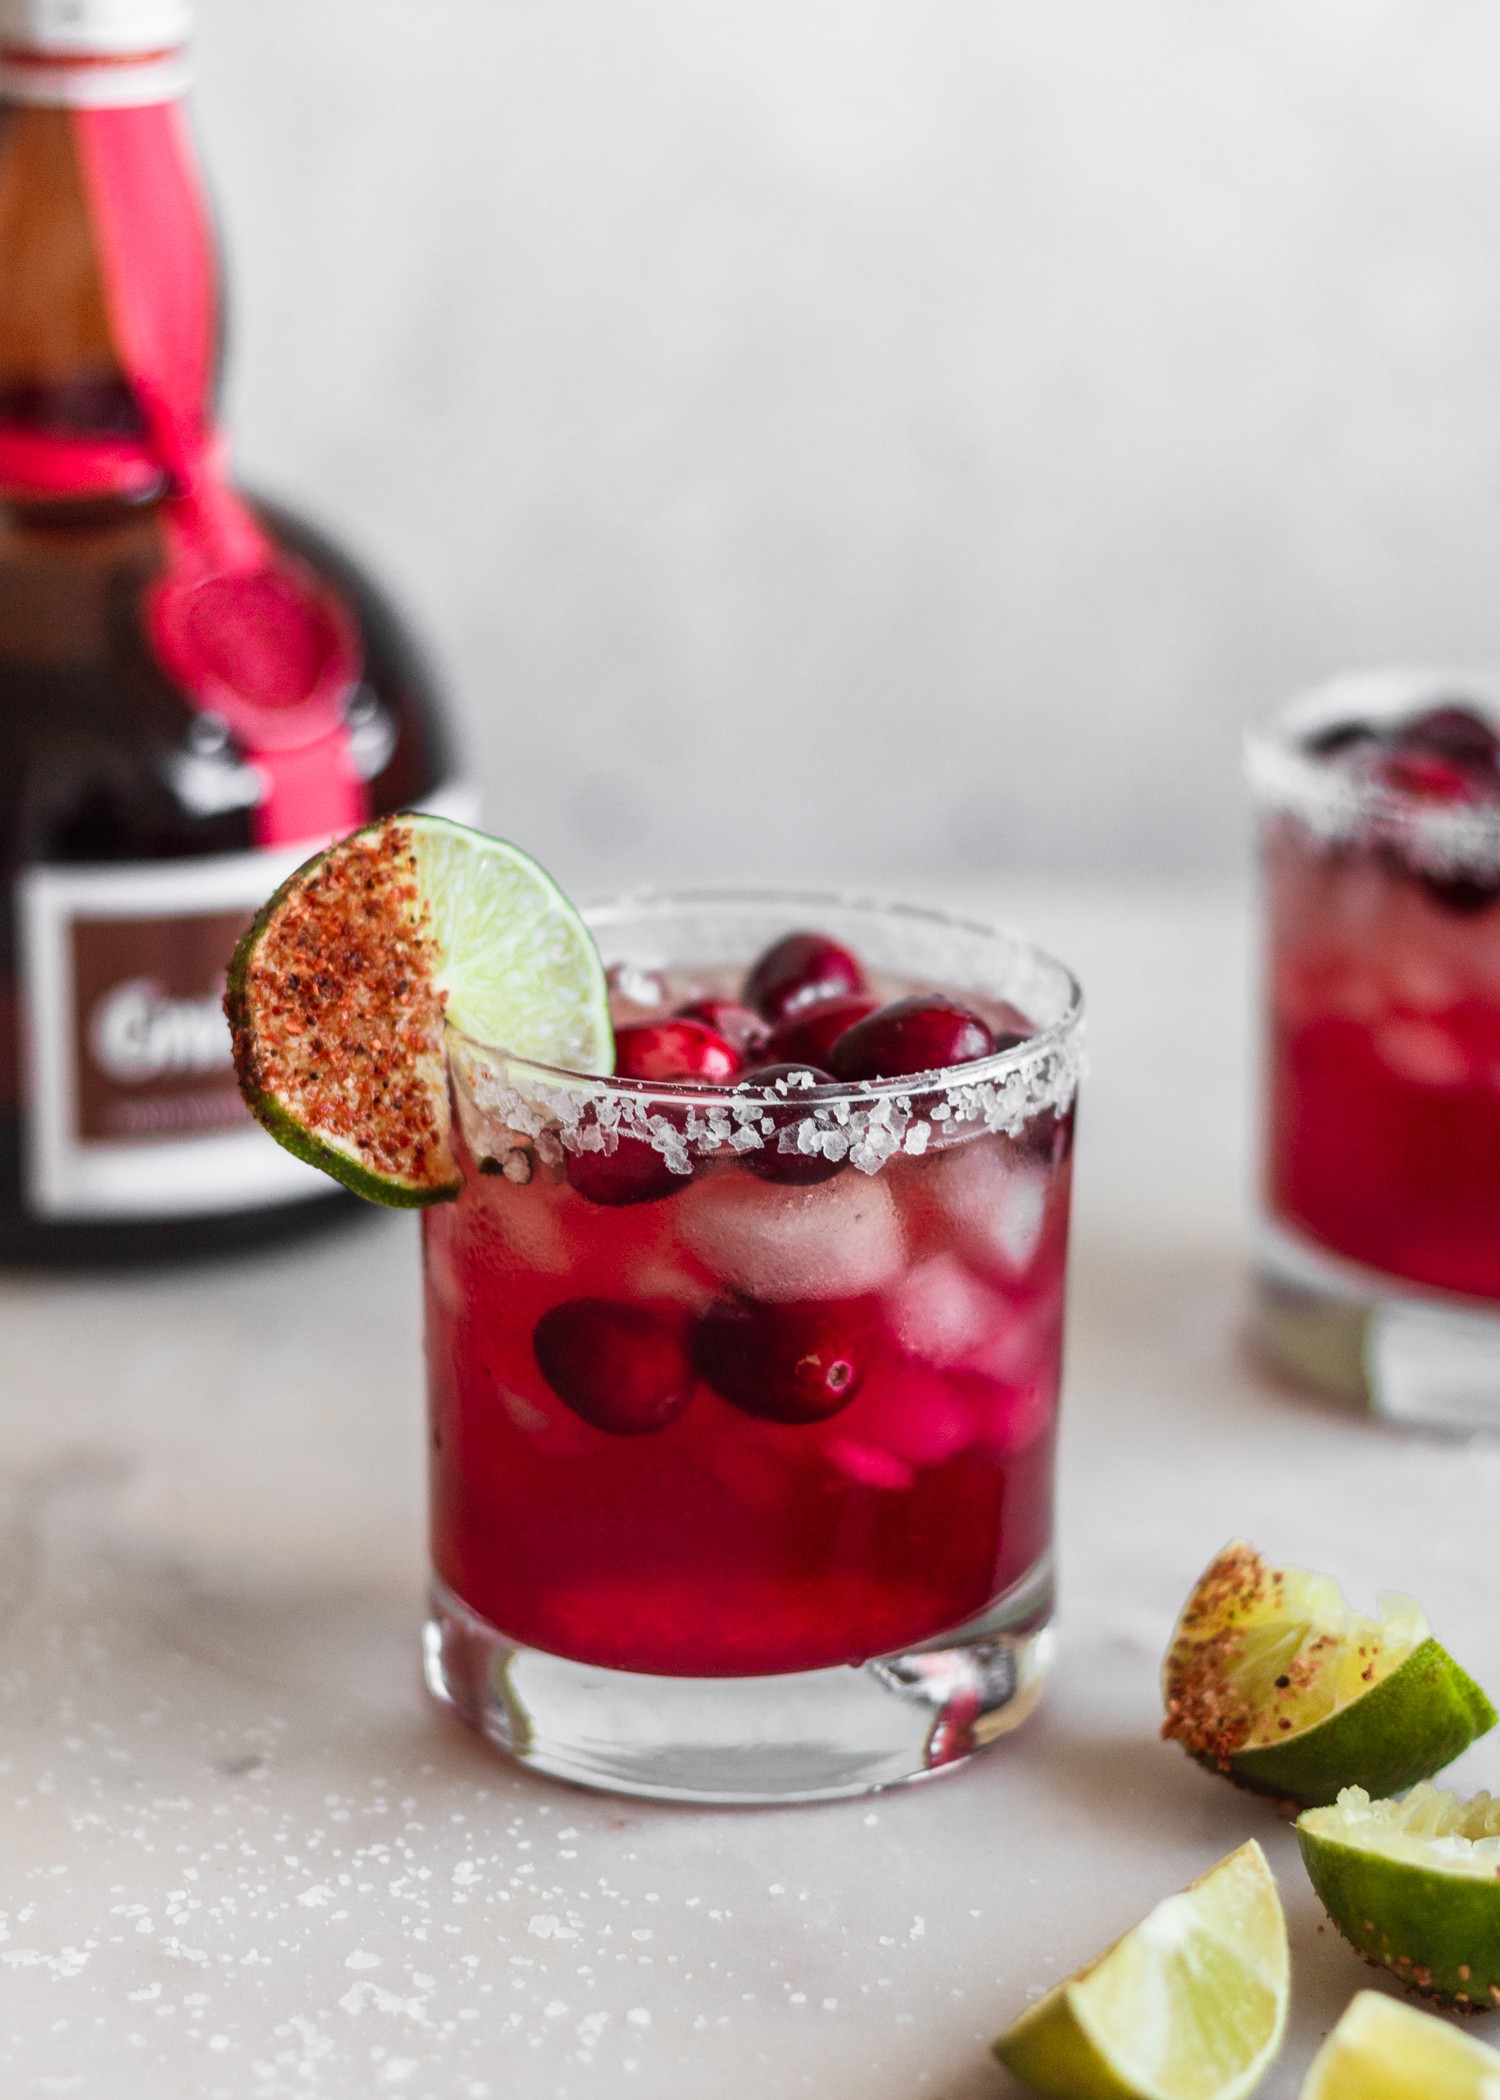 A close-up side shot of a cranberry margarita on a white marble table surrounded by limes, a bottle of Grand Marnier, and more cranberry margaritas.